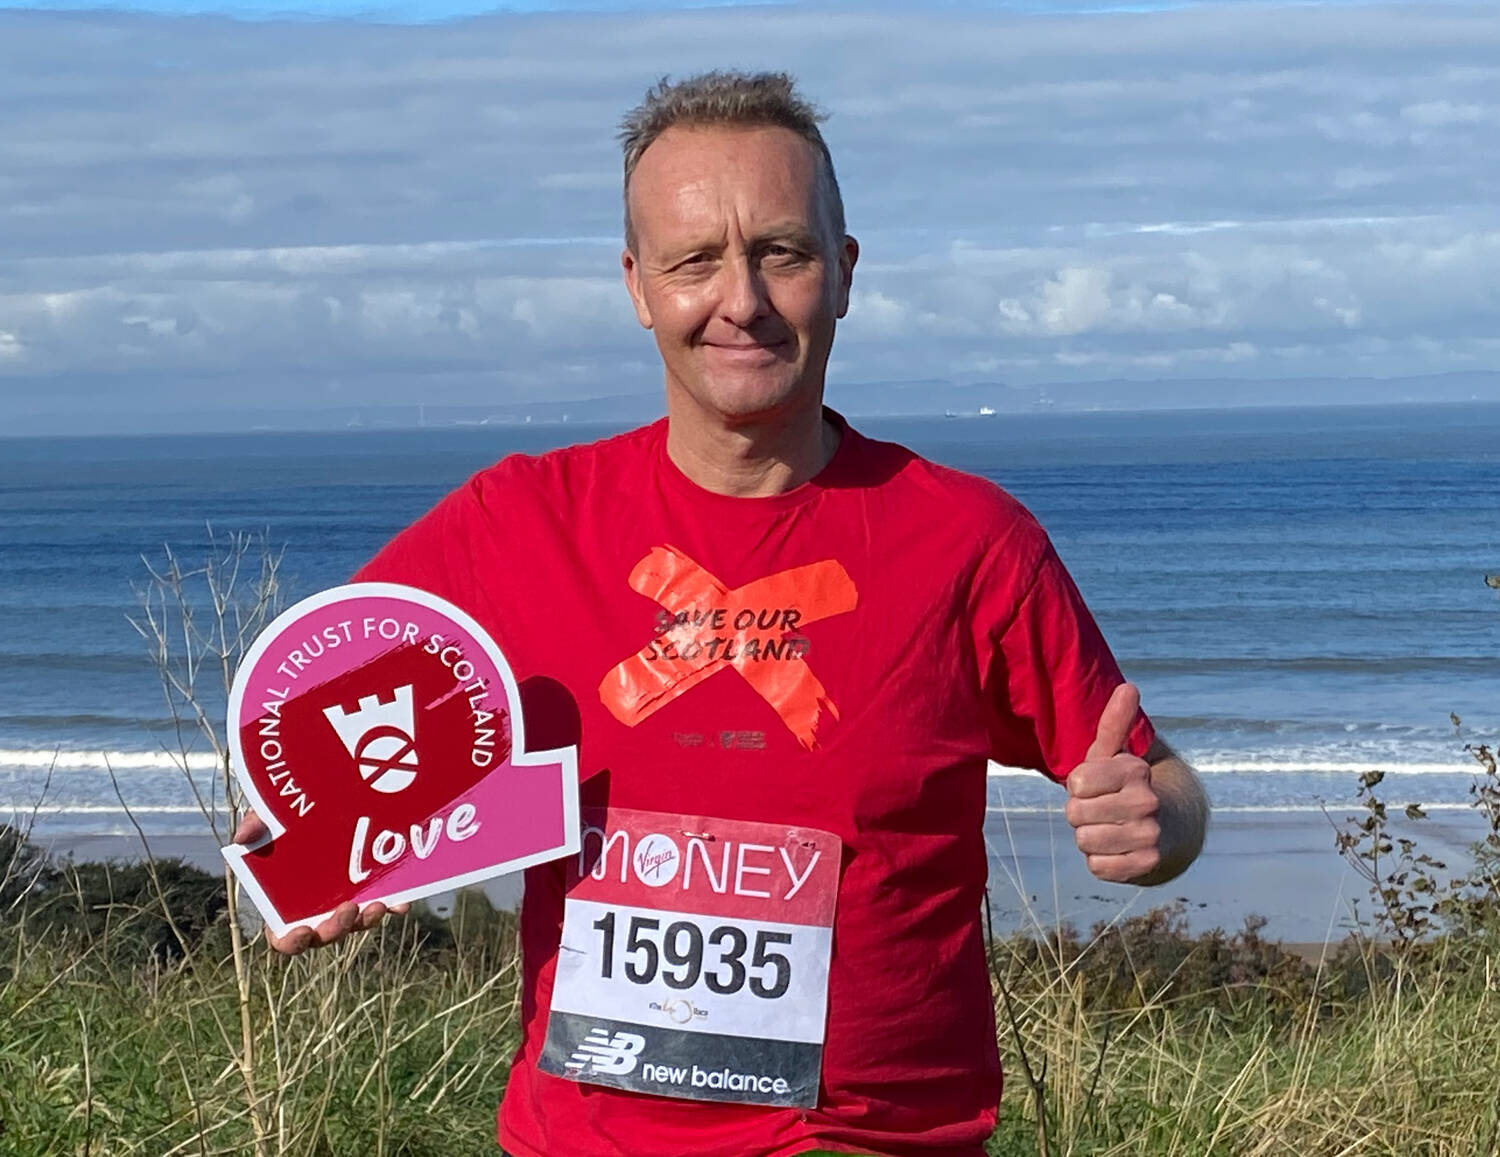 A man in a bright red t-shirt with a runner's number pinned to the front stands on a grassy area in front of the sea. In one hand he holds an omega-shaped board that says Love; he's giving a thumbs up sign with his other hand.